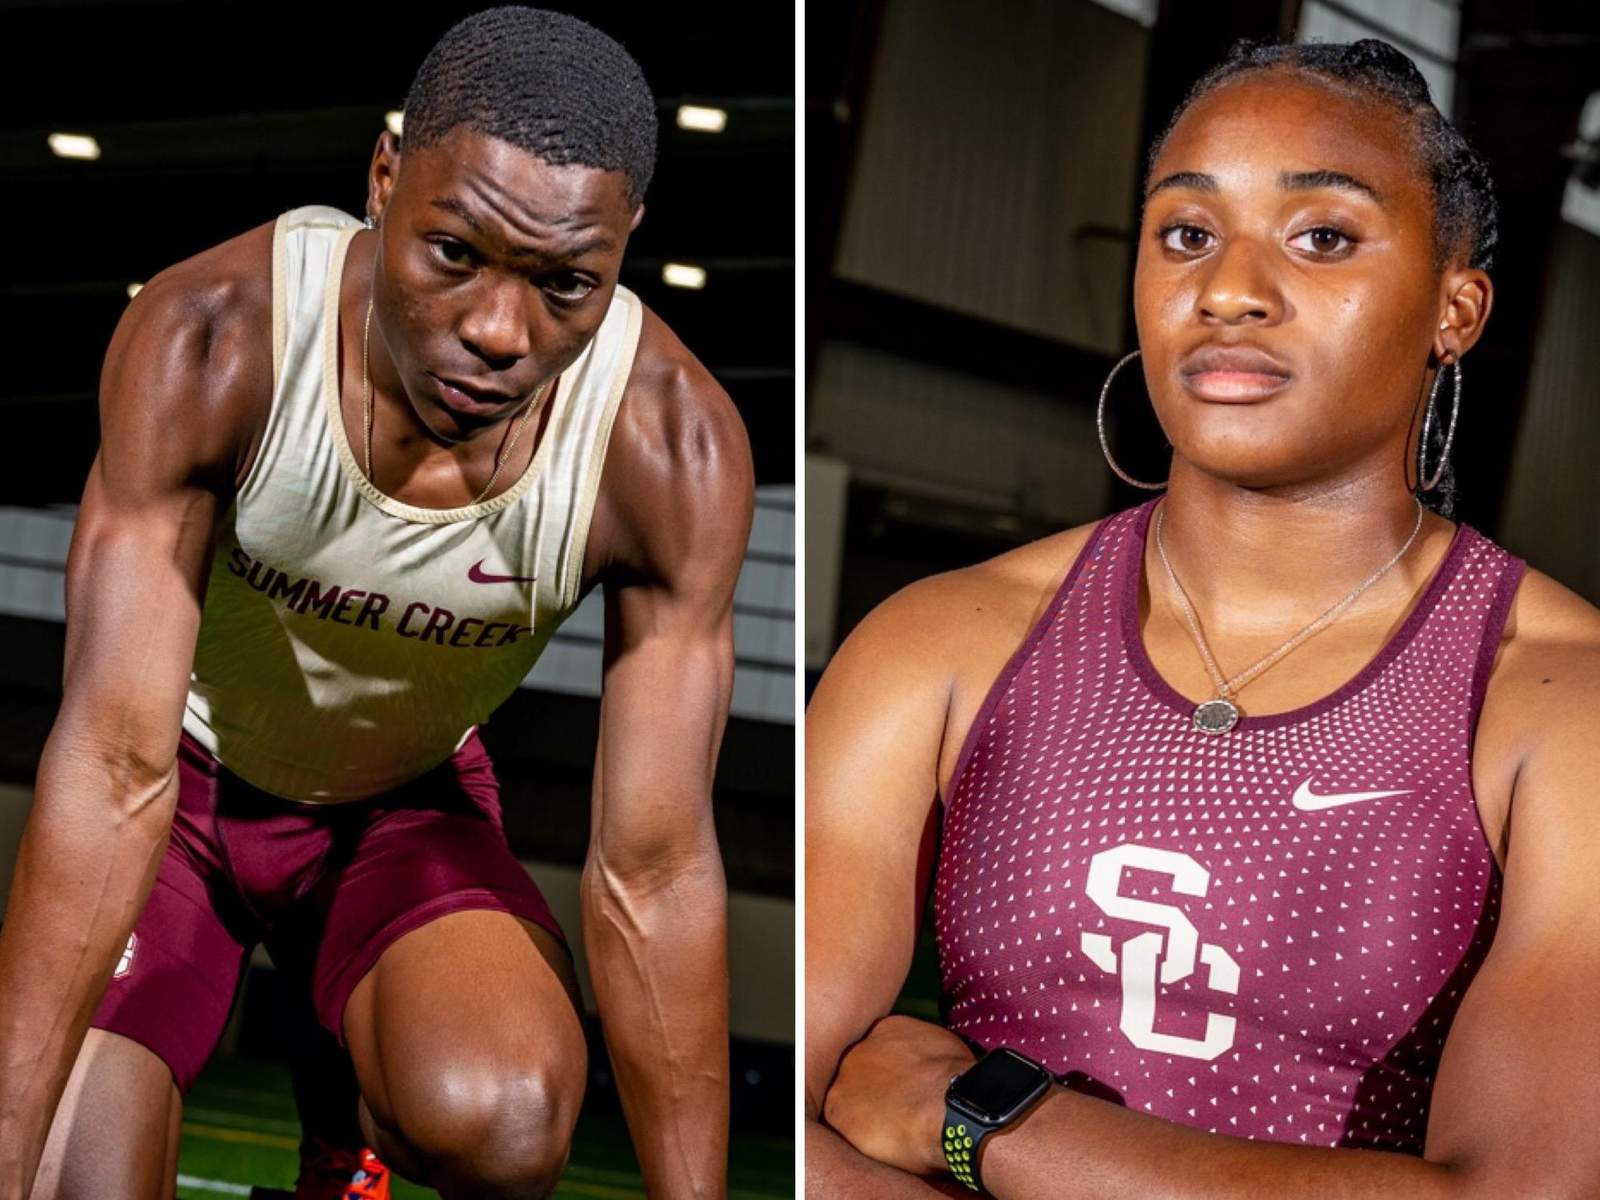 Summer Creek Track & Field presented by Academy Sports + Outdoors